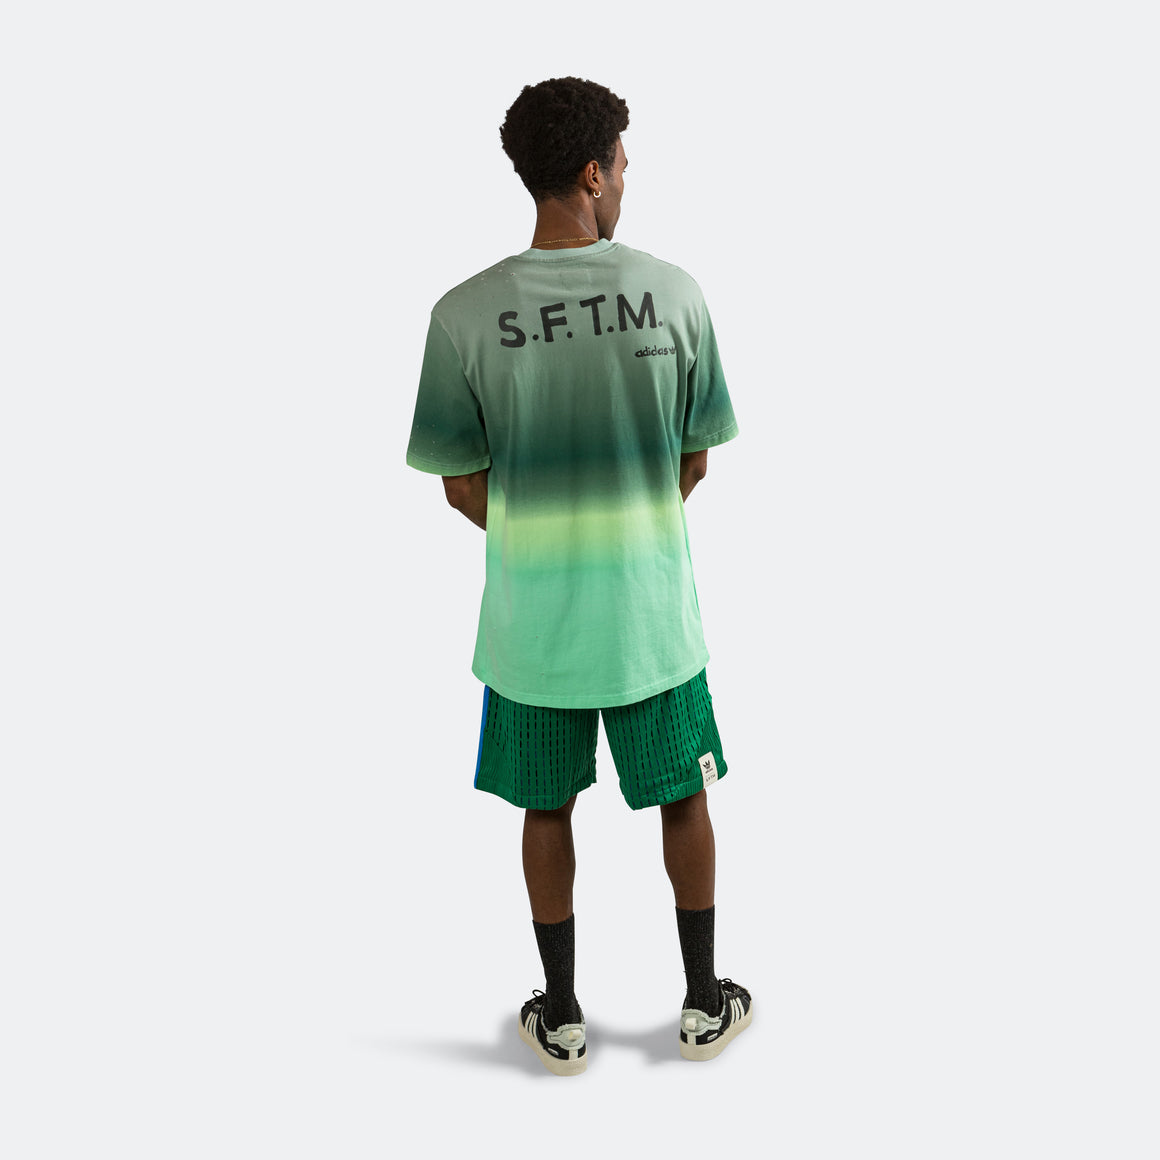 adidas - SFTM Tee 1 - Hazy Green/Tech Forest - UP THERE